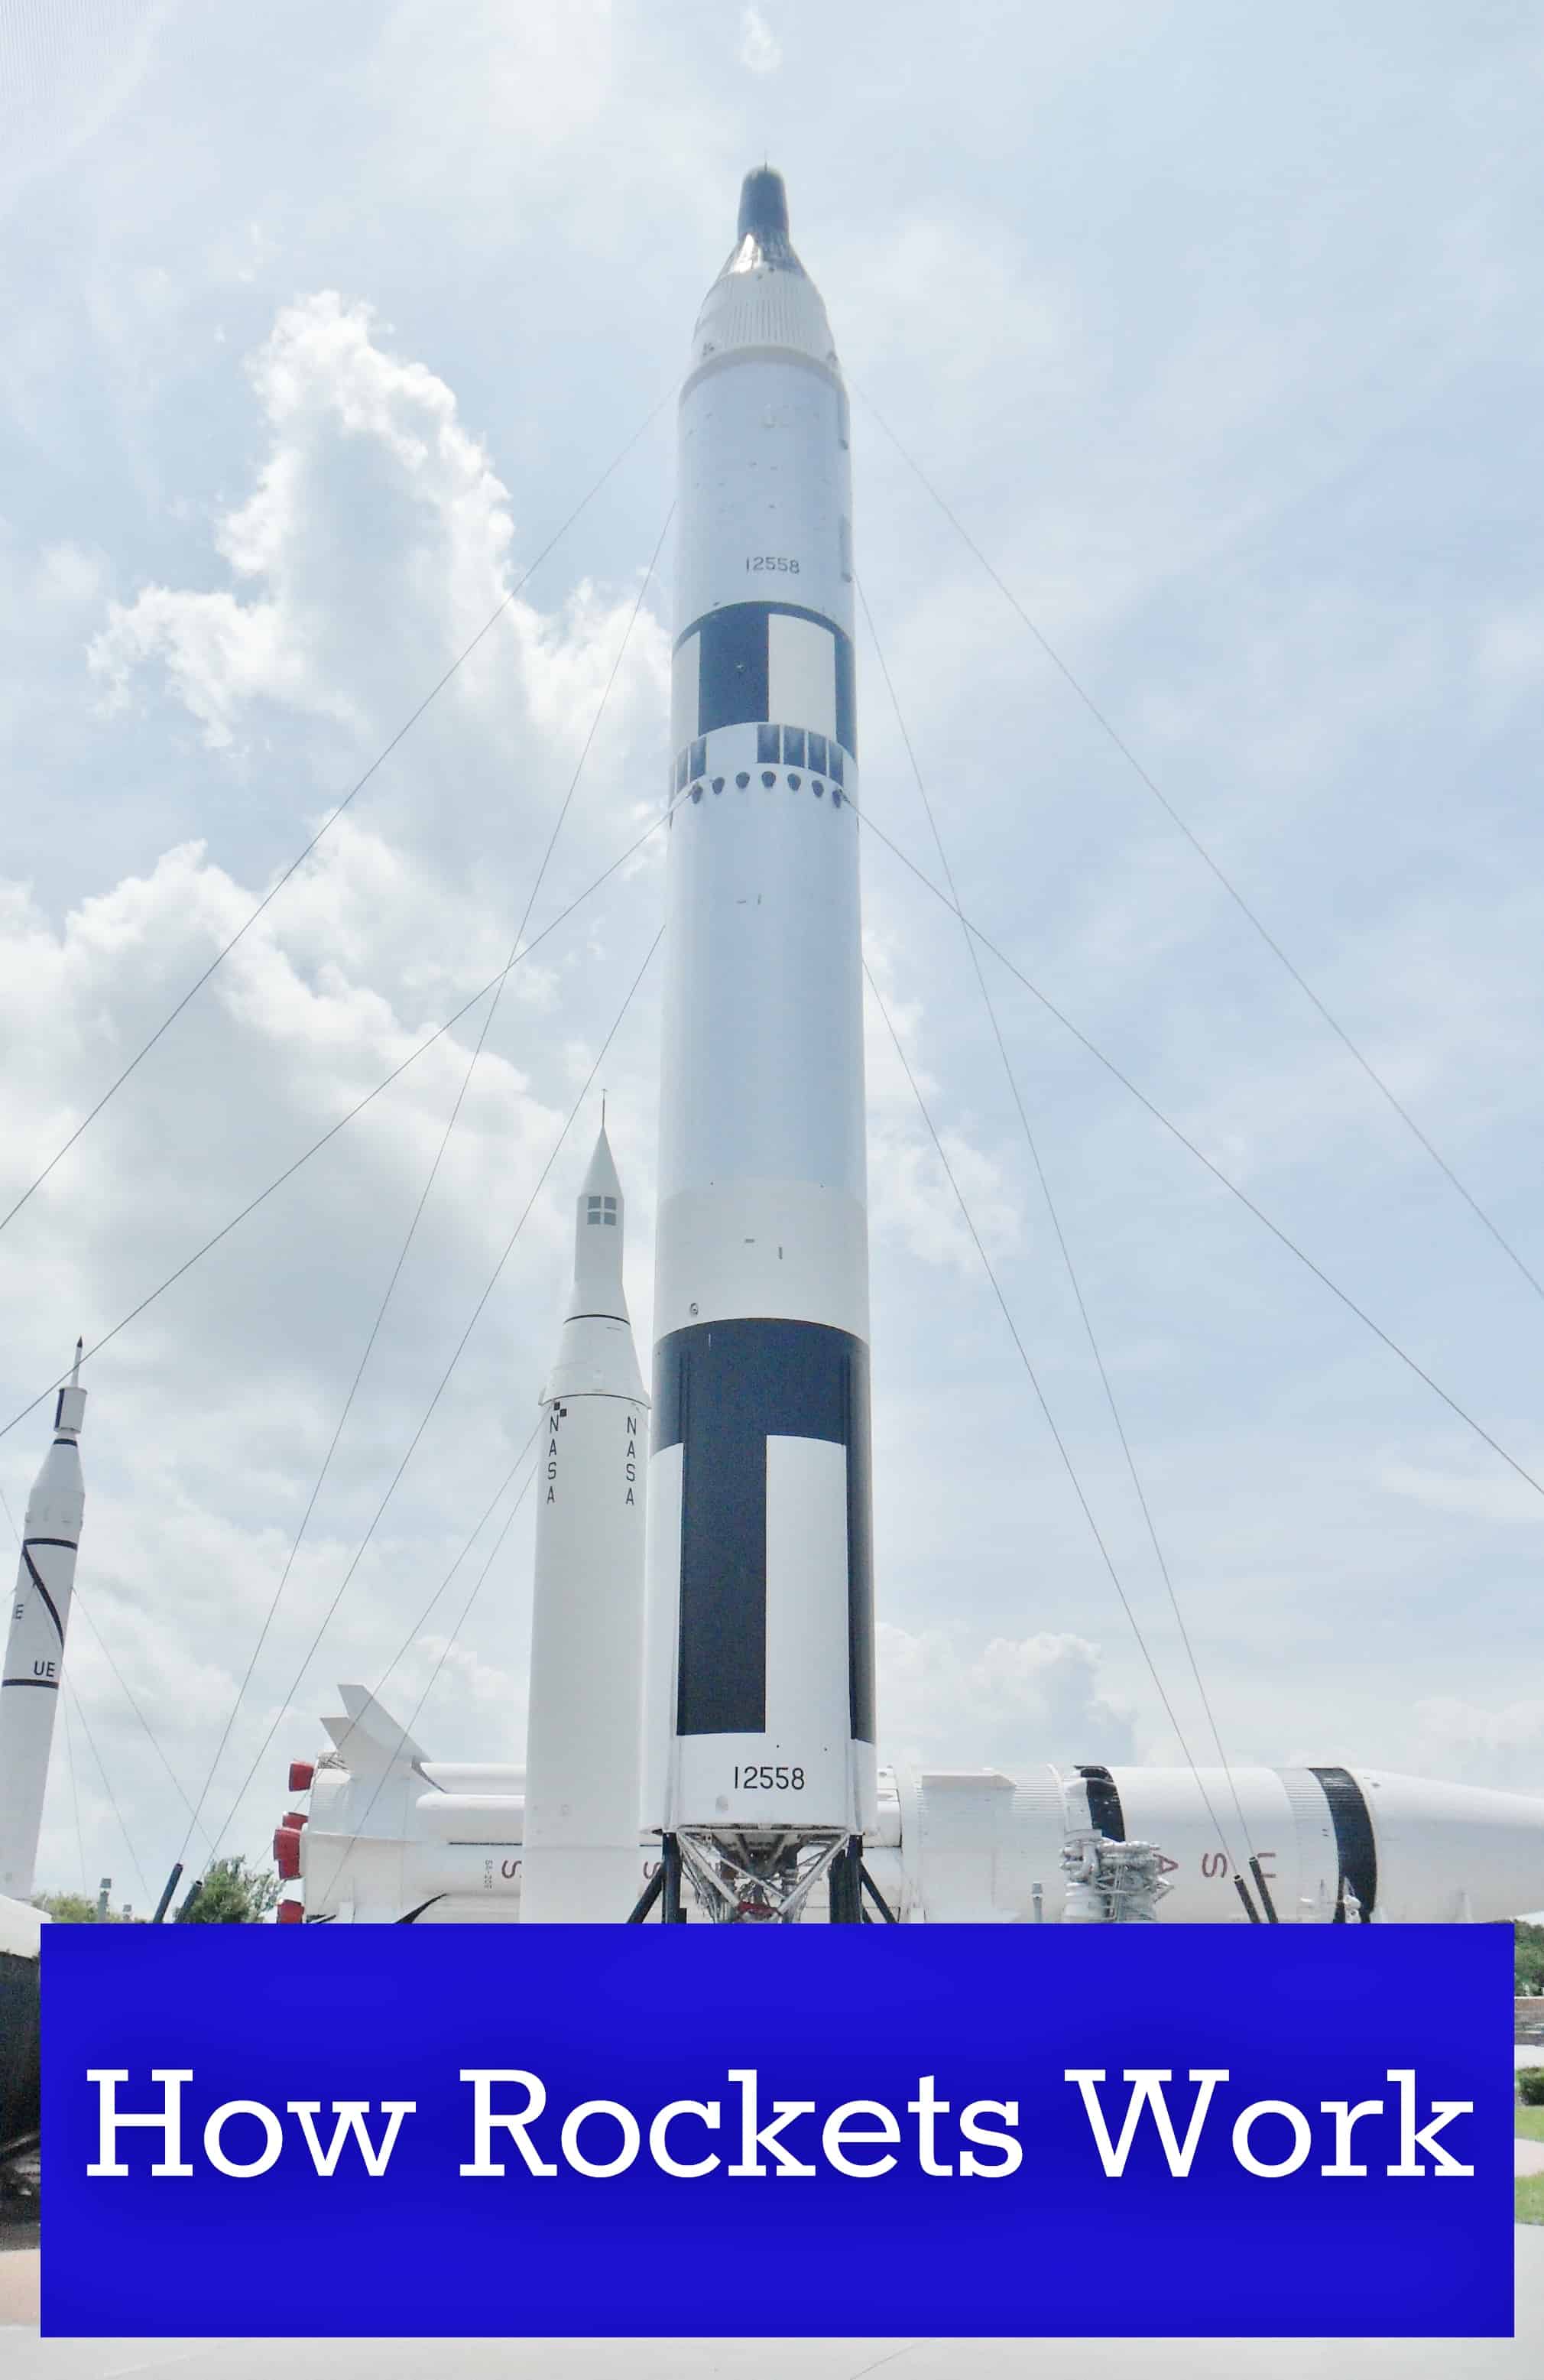 Reading Rockets - Rocketeers it's time to 𝐒𝐔𝐈𝐓 𝐔𝐏! We